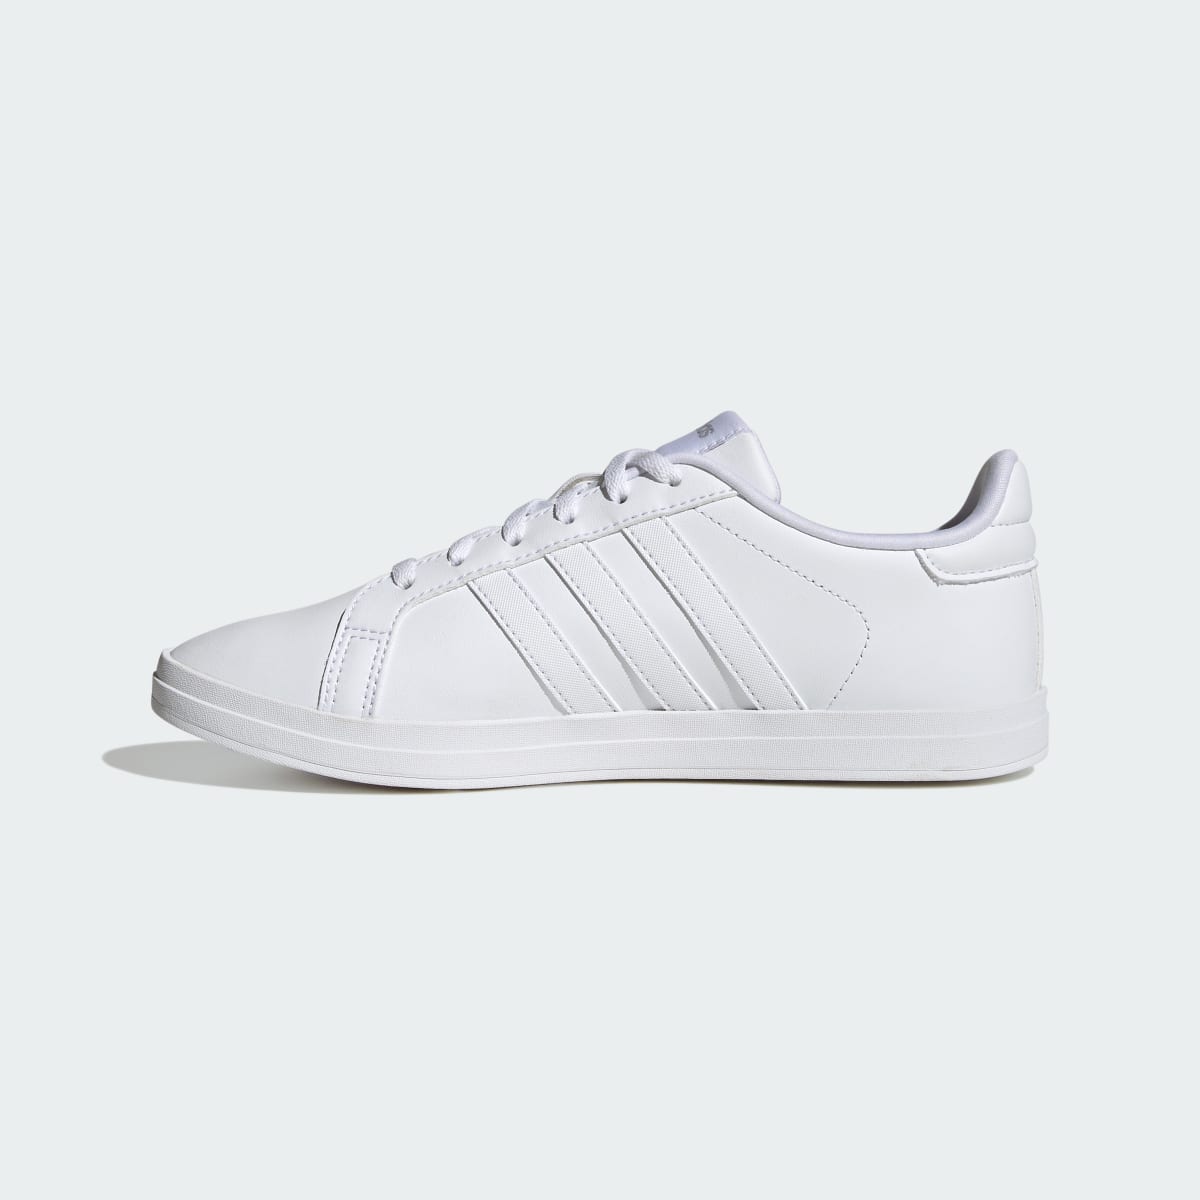 Adidas Courtpoint X Shoes. 7